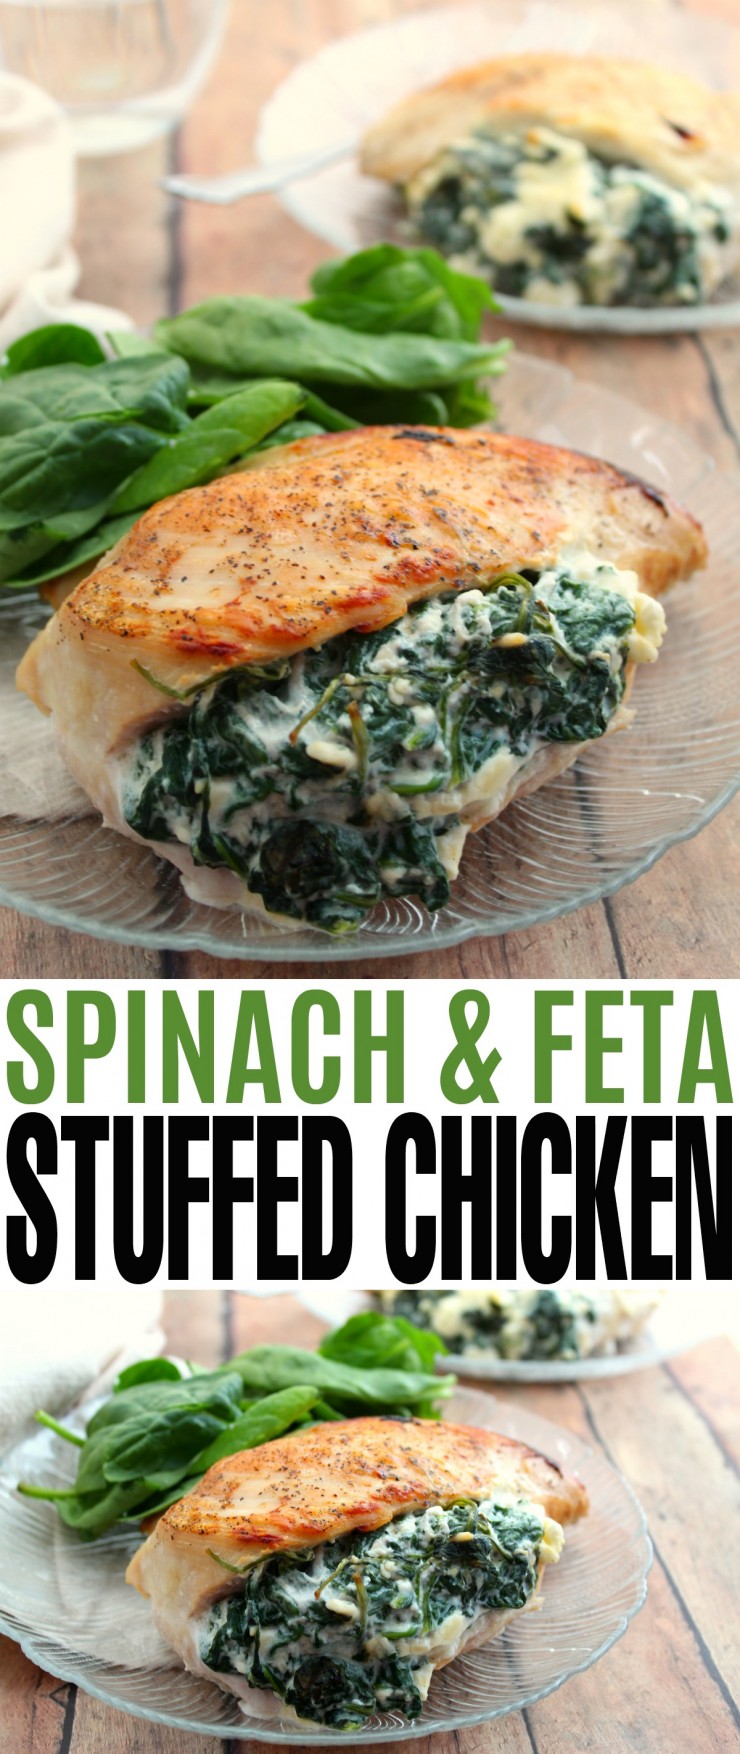 This Spinach & Feta Stuffed Chicken is an easy weeknight meal that looks and tastes anything but. It's a no-fuss chicken dinner recipe that is sure to be a hit!